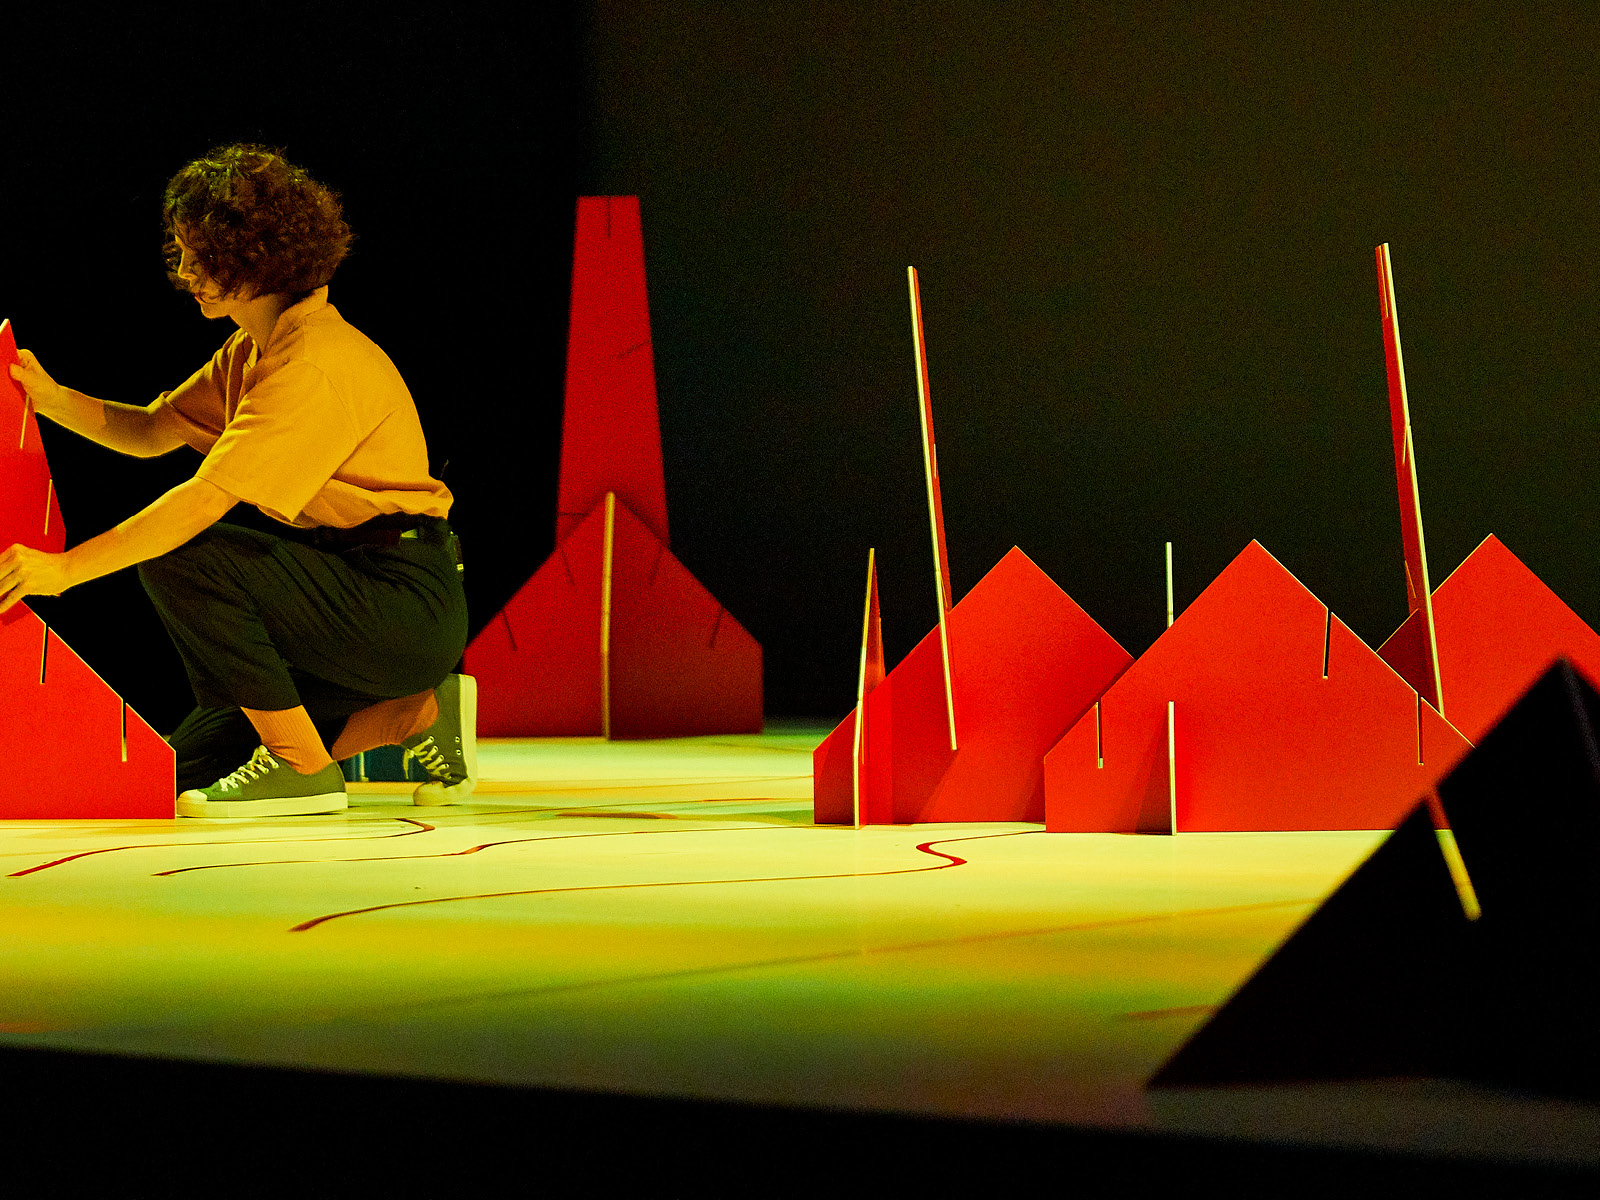 A woman kneels on the floor of a stage in the midst of patched-together, colorful surfaces.